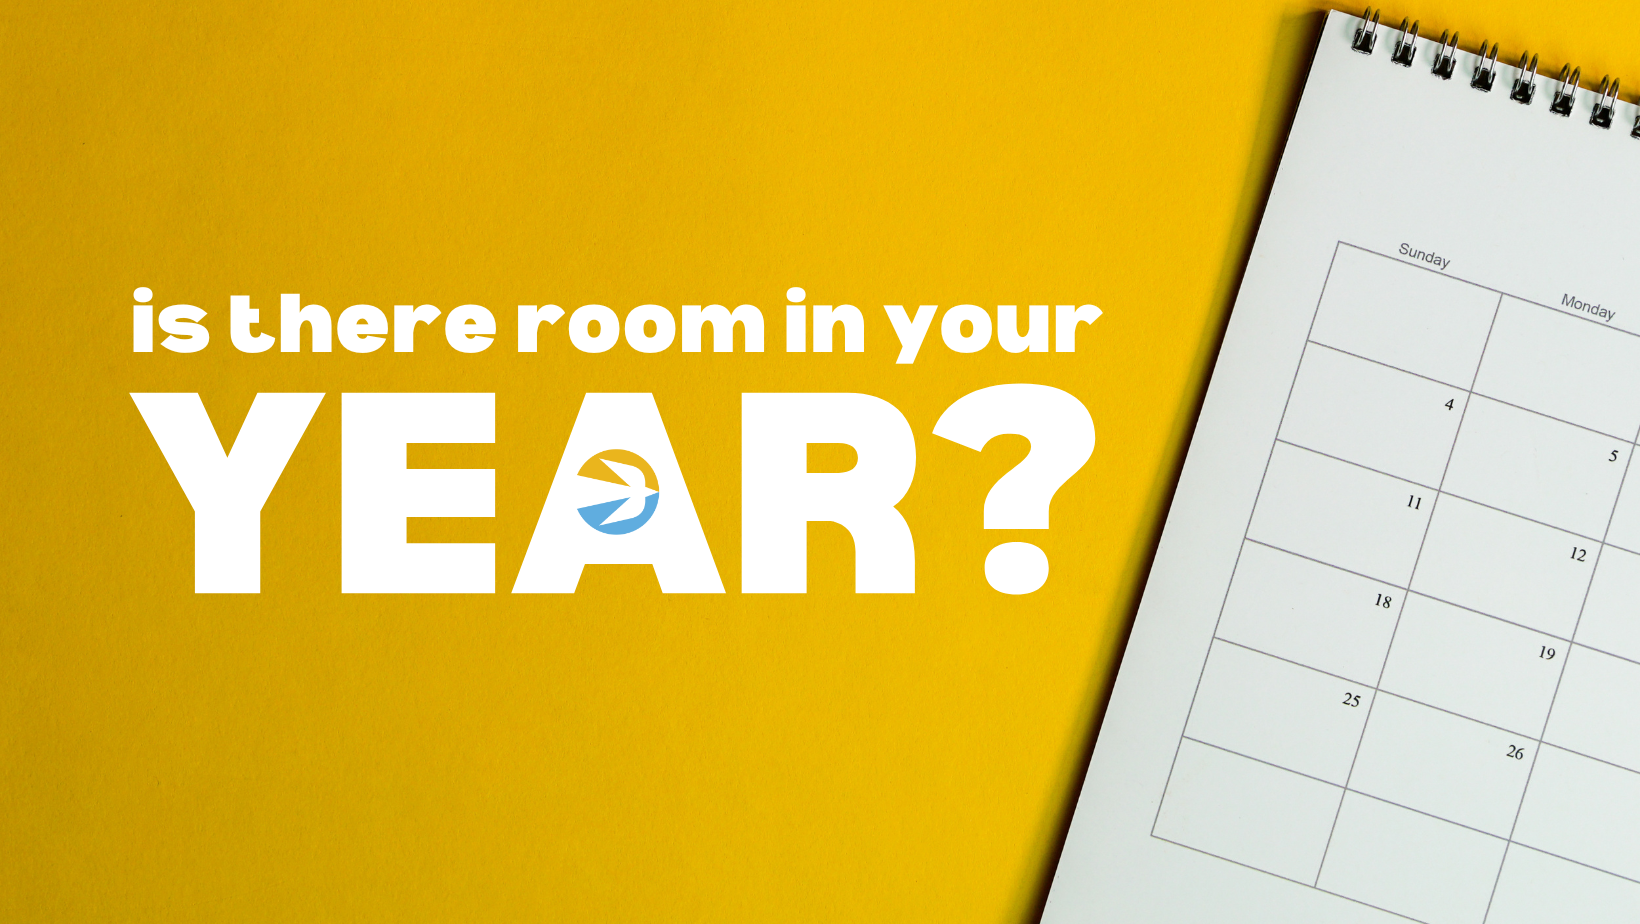 A spiral-bound calendar is open to the month of March on a yellow background. To the left of the calendar, text in bold white lettering reads "Is there room in your YEAR?" The letter "A" in "YEAR" is stylized with an arrow symbol.